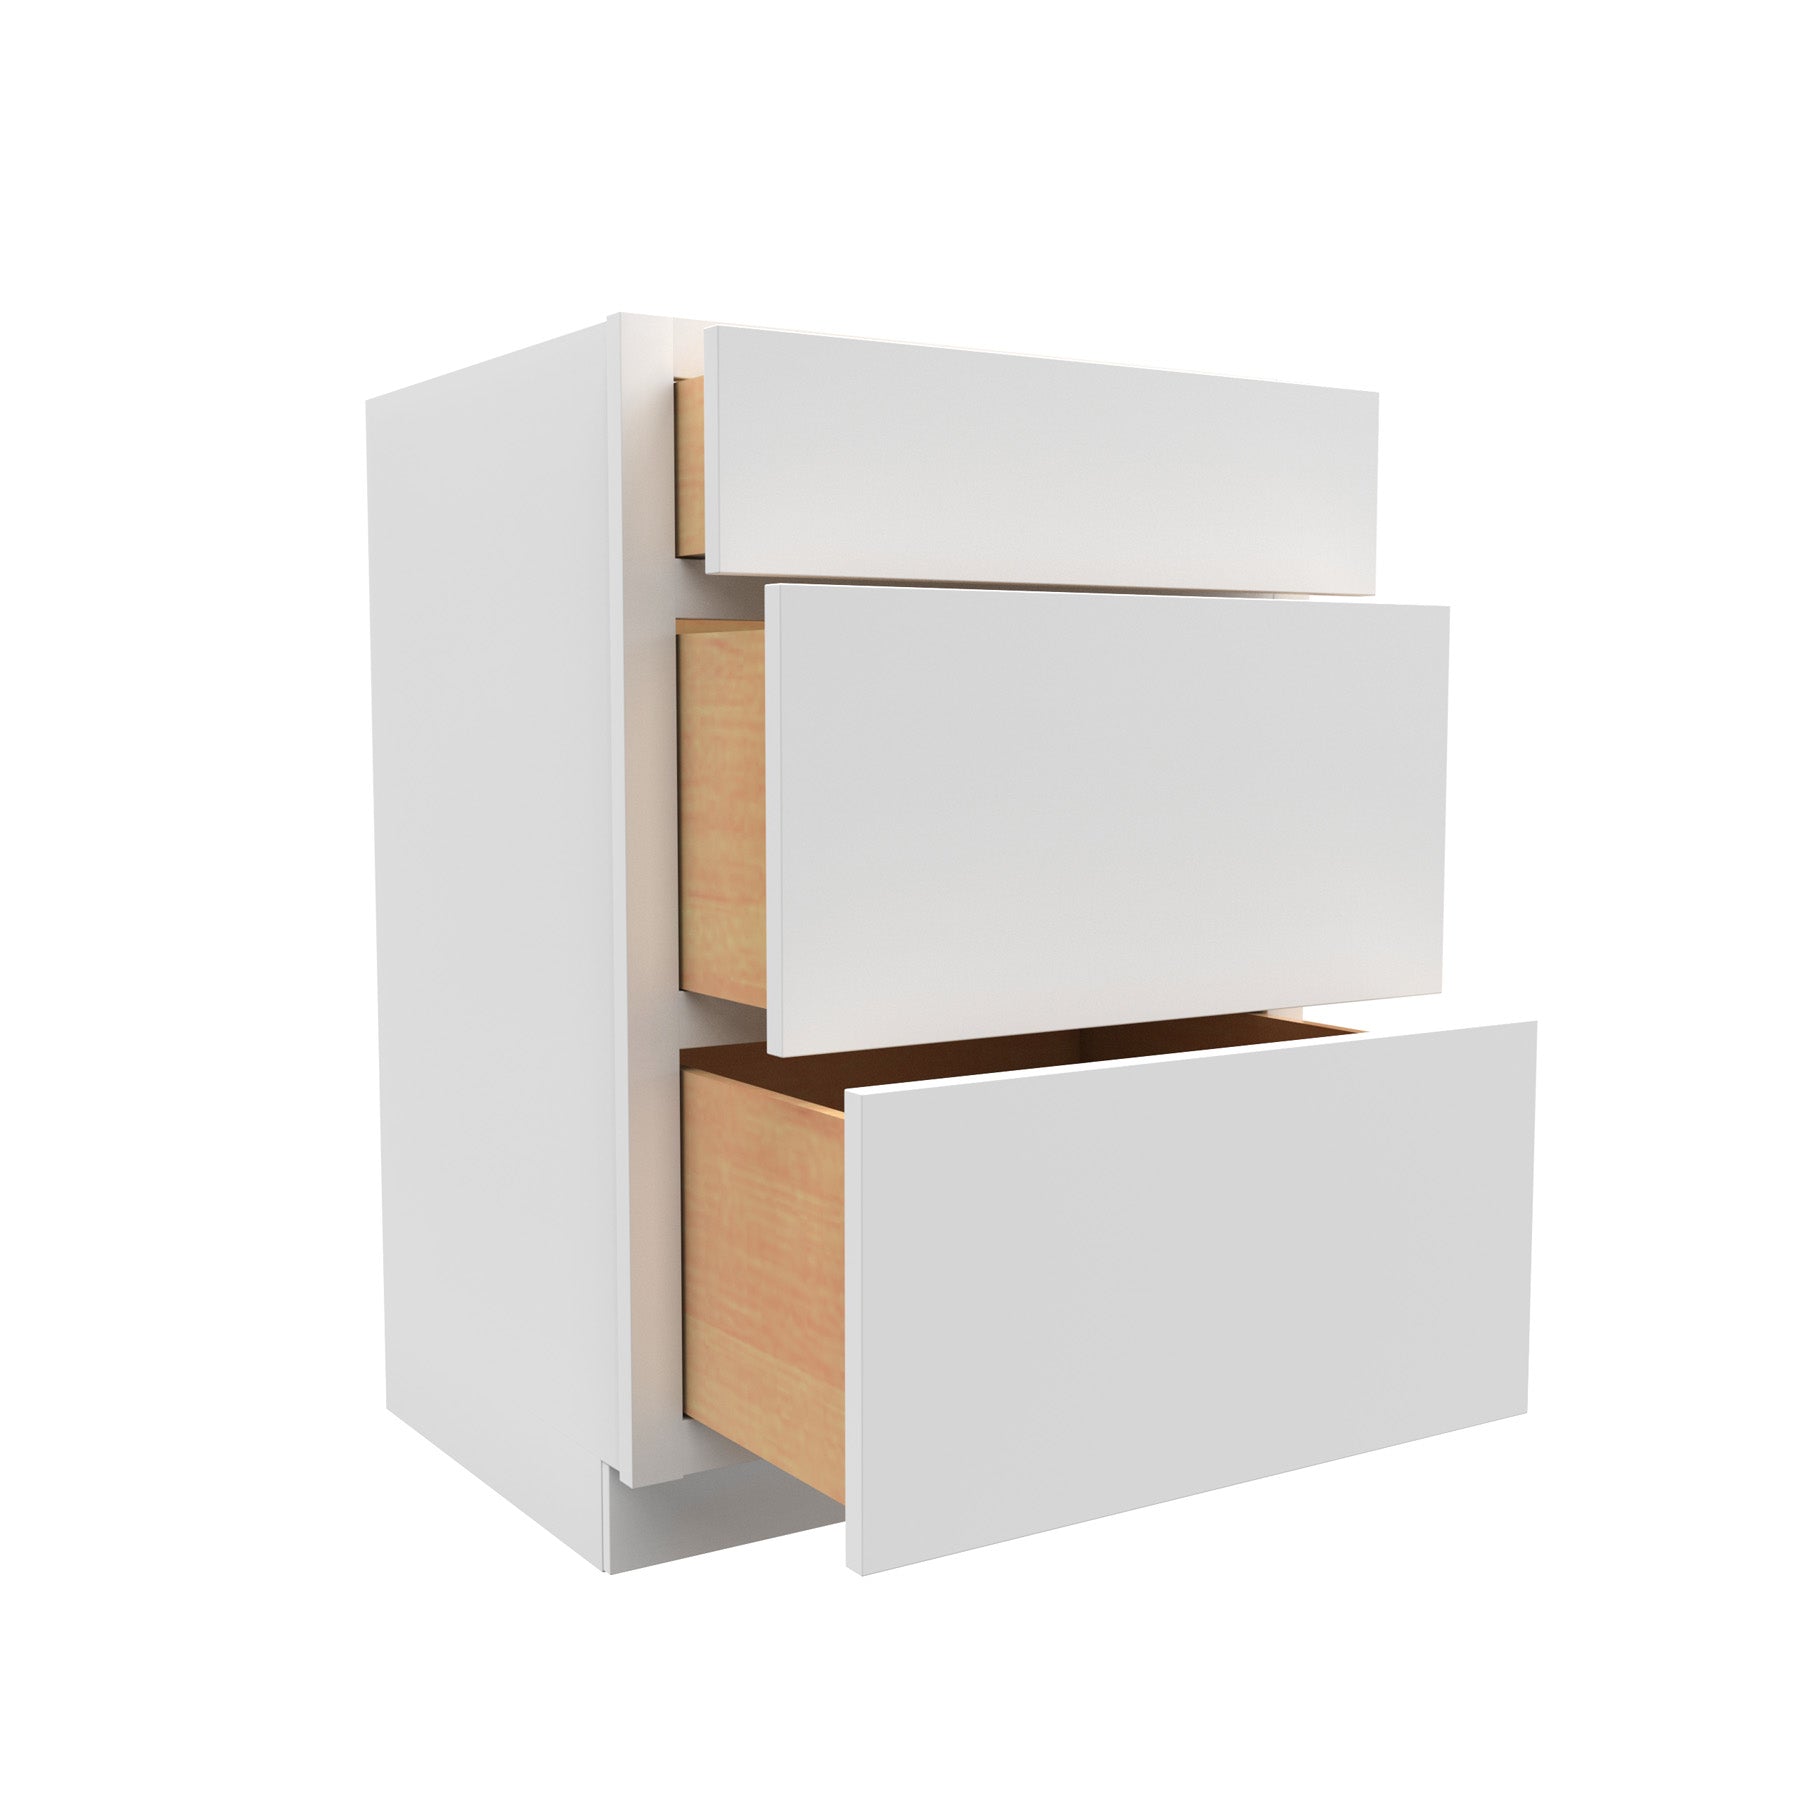 24 Inch Wide 3 Drawer Vanity Cabinet - Luxor White Shaker - Ready To Assemble, 24"W x 34.5"H x 21"D